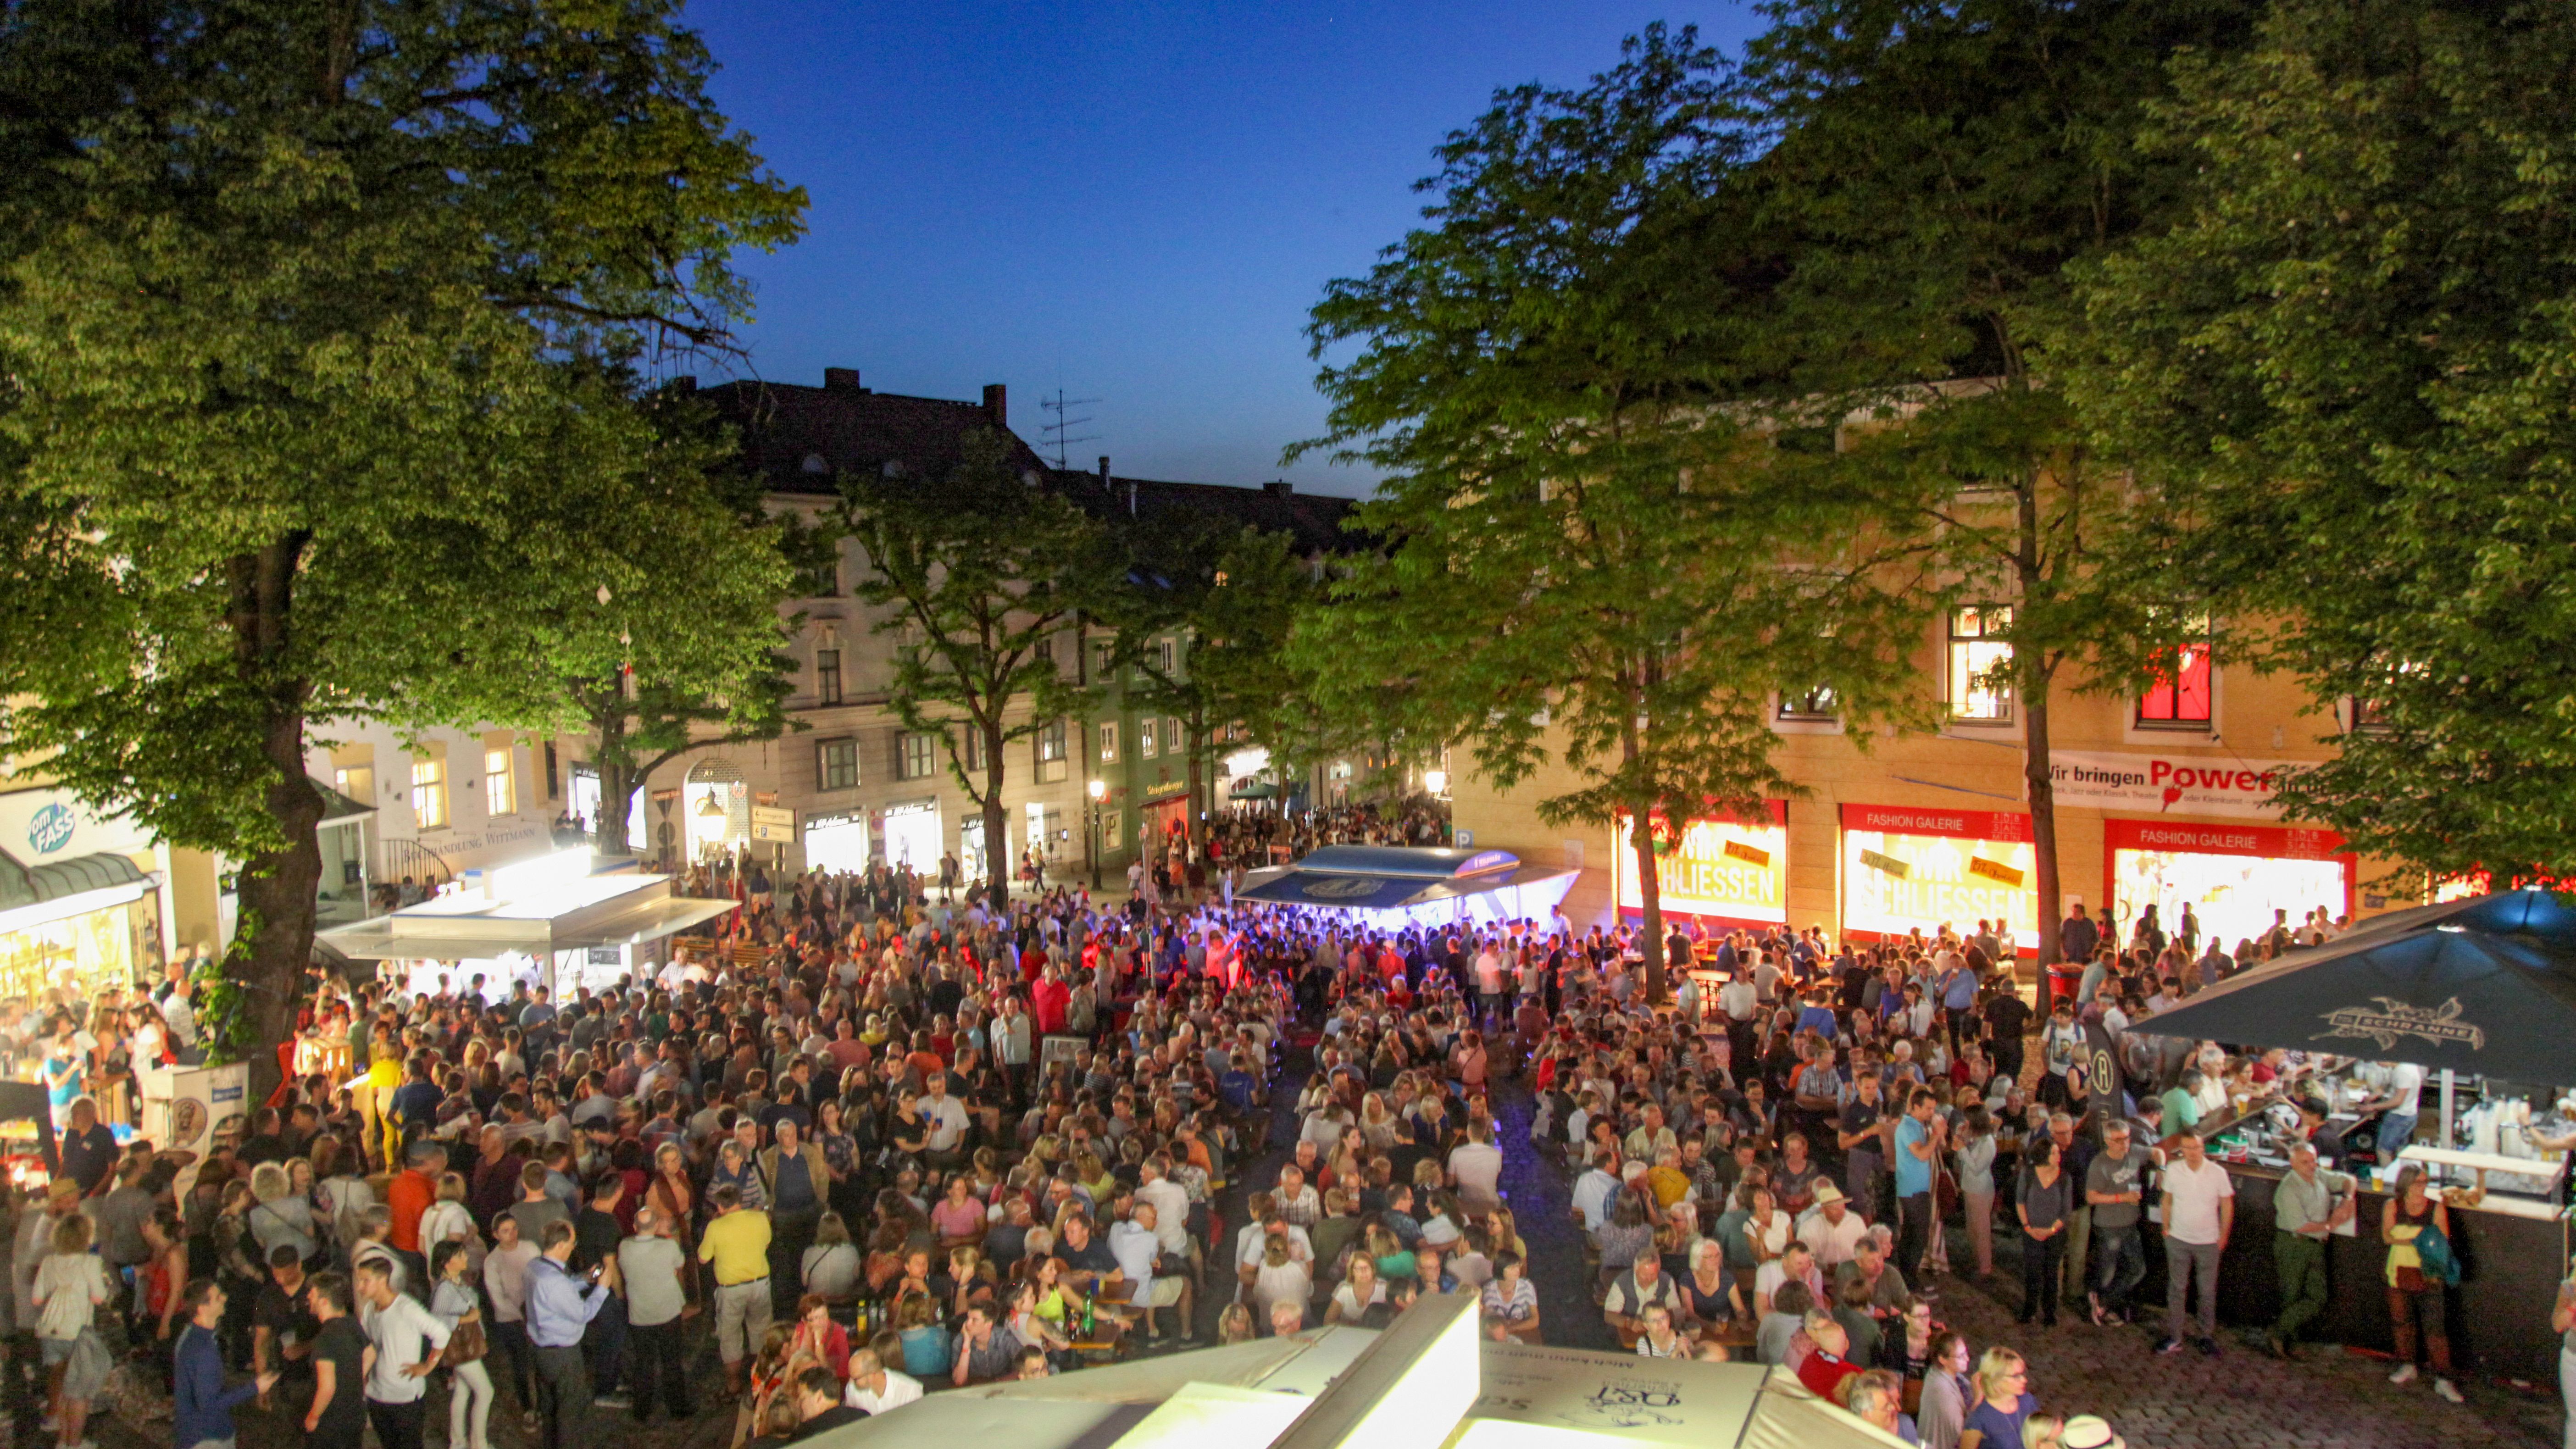 Street festival: "Jazz in allen Gassen", he entire old town becomes a pedestrian zone. Visitors enjoy live music.